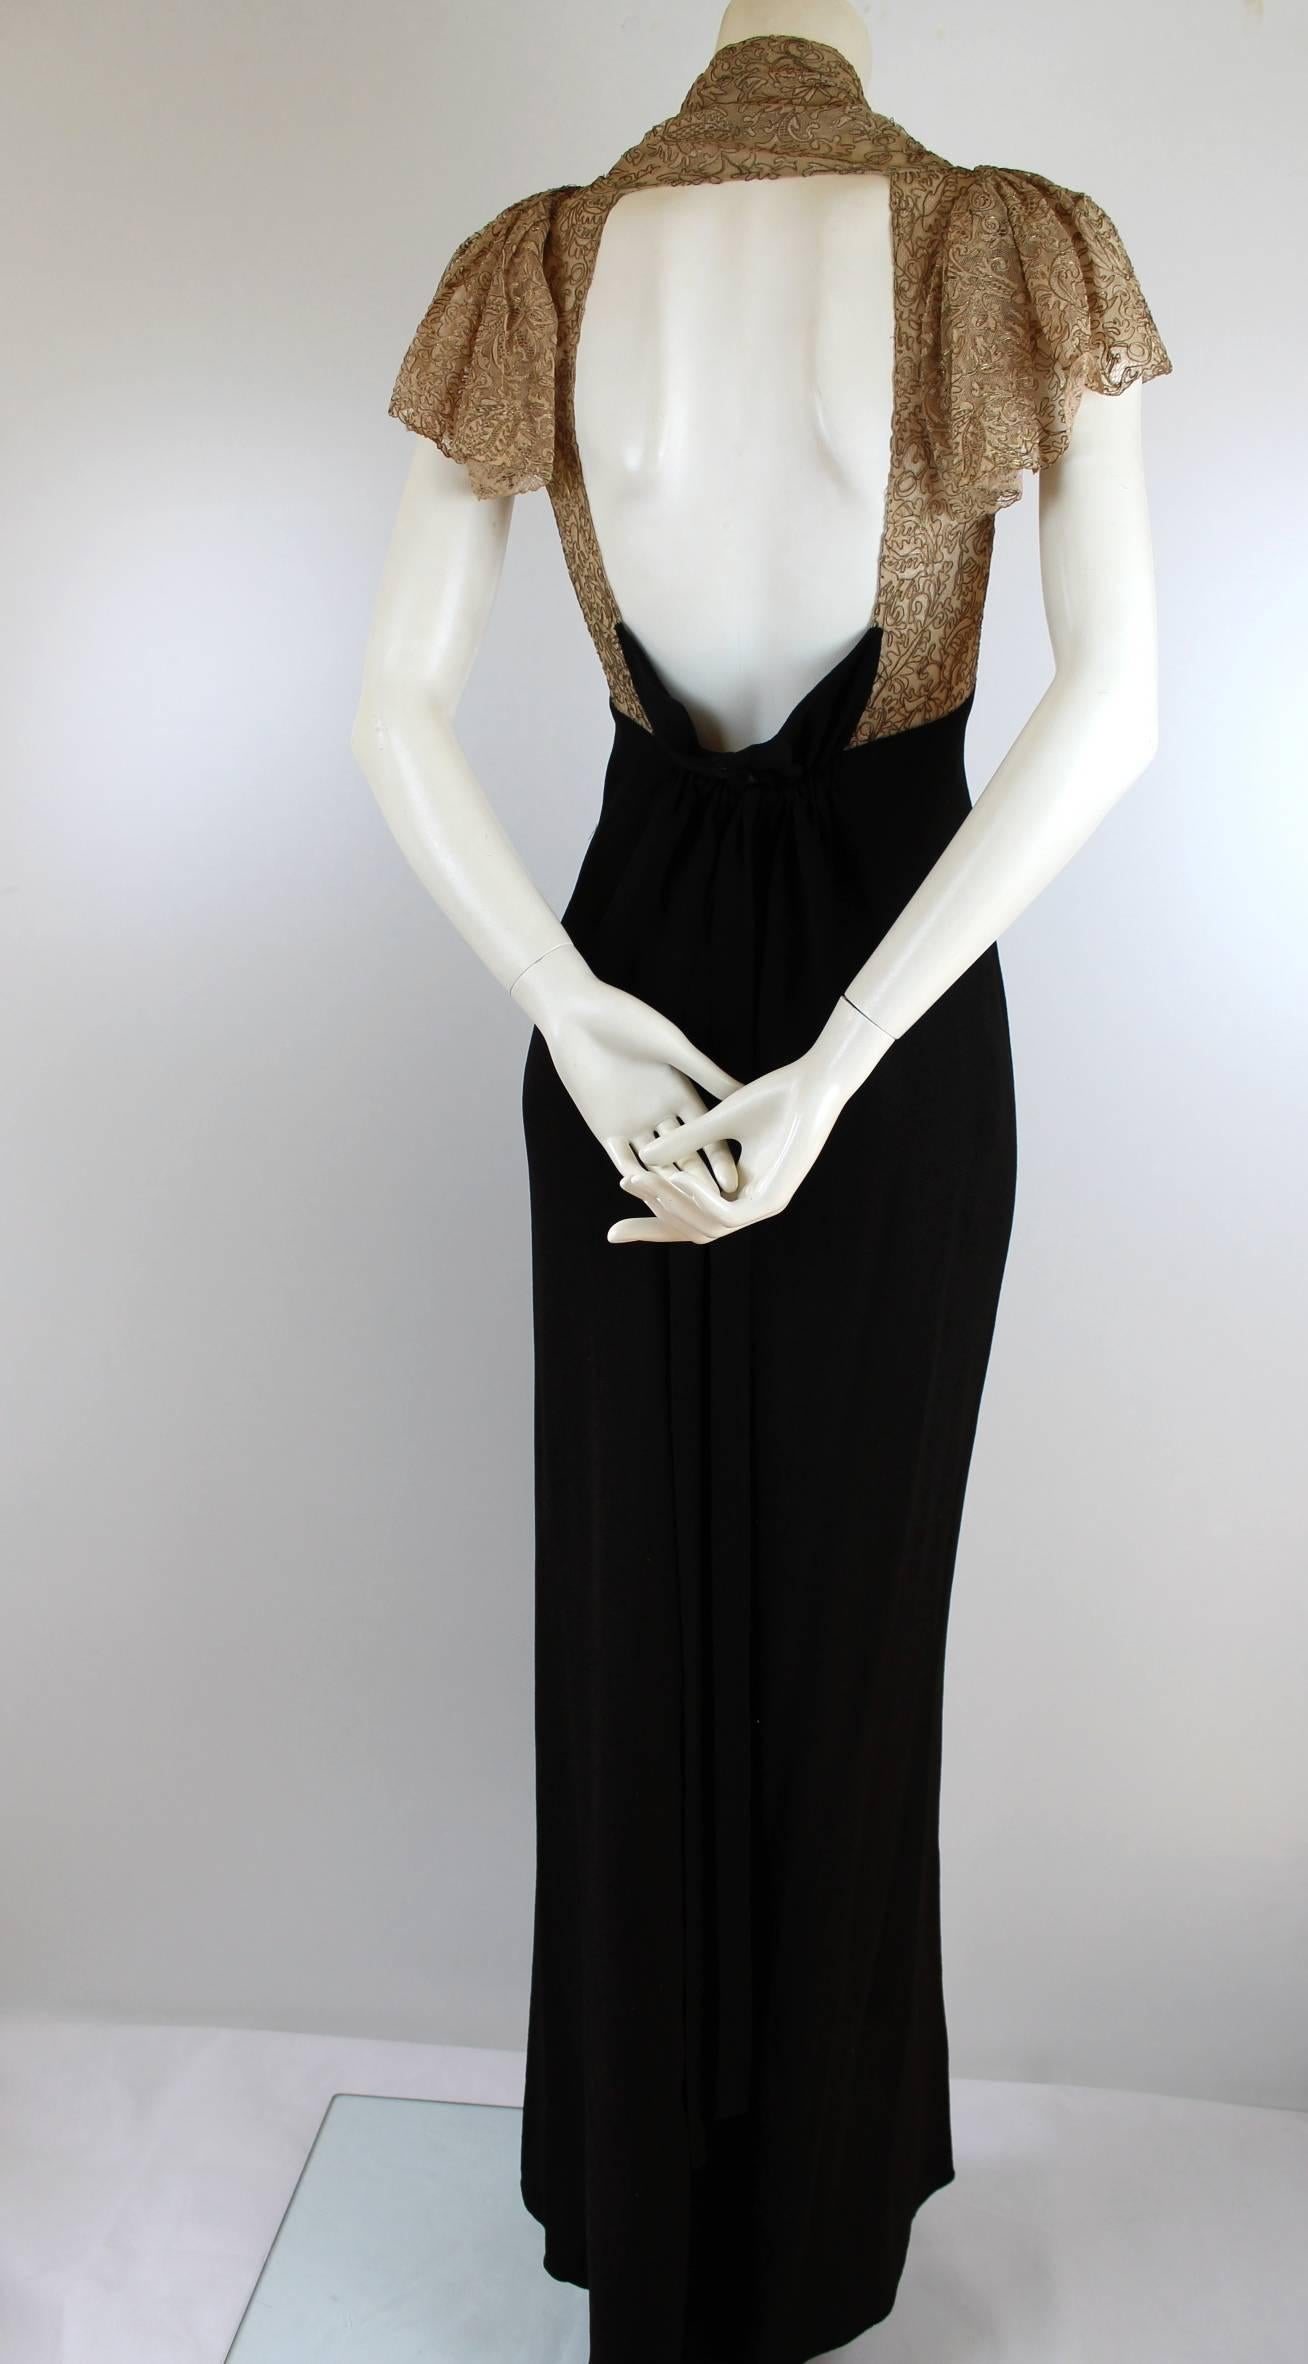 Black 1930s/1940s Gold lace and Crepe Bacless Dress with Original Corsage